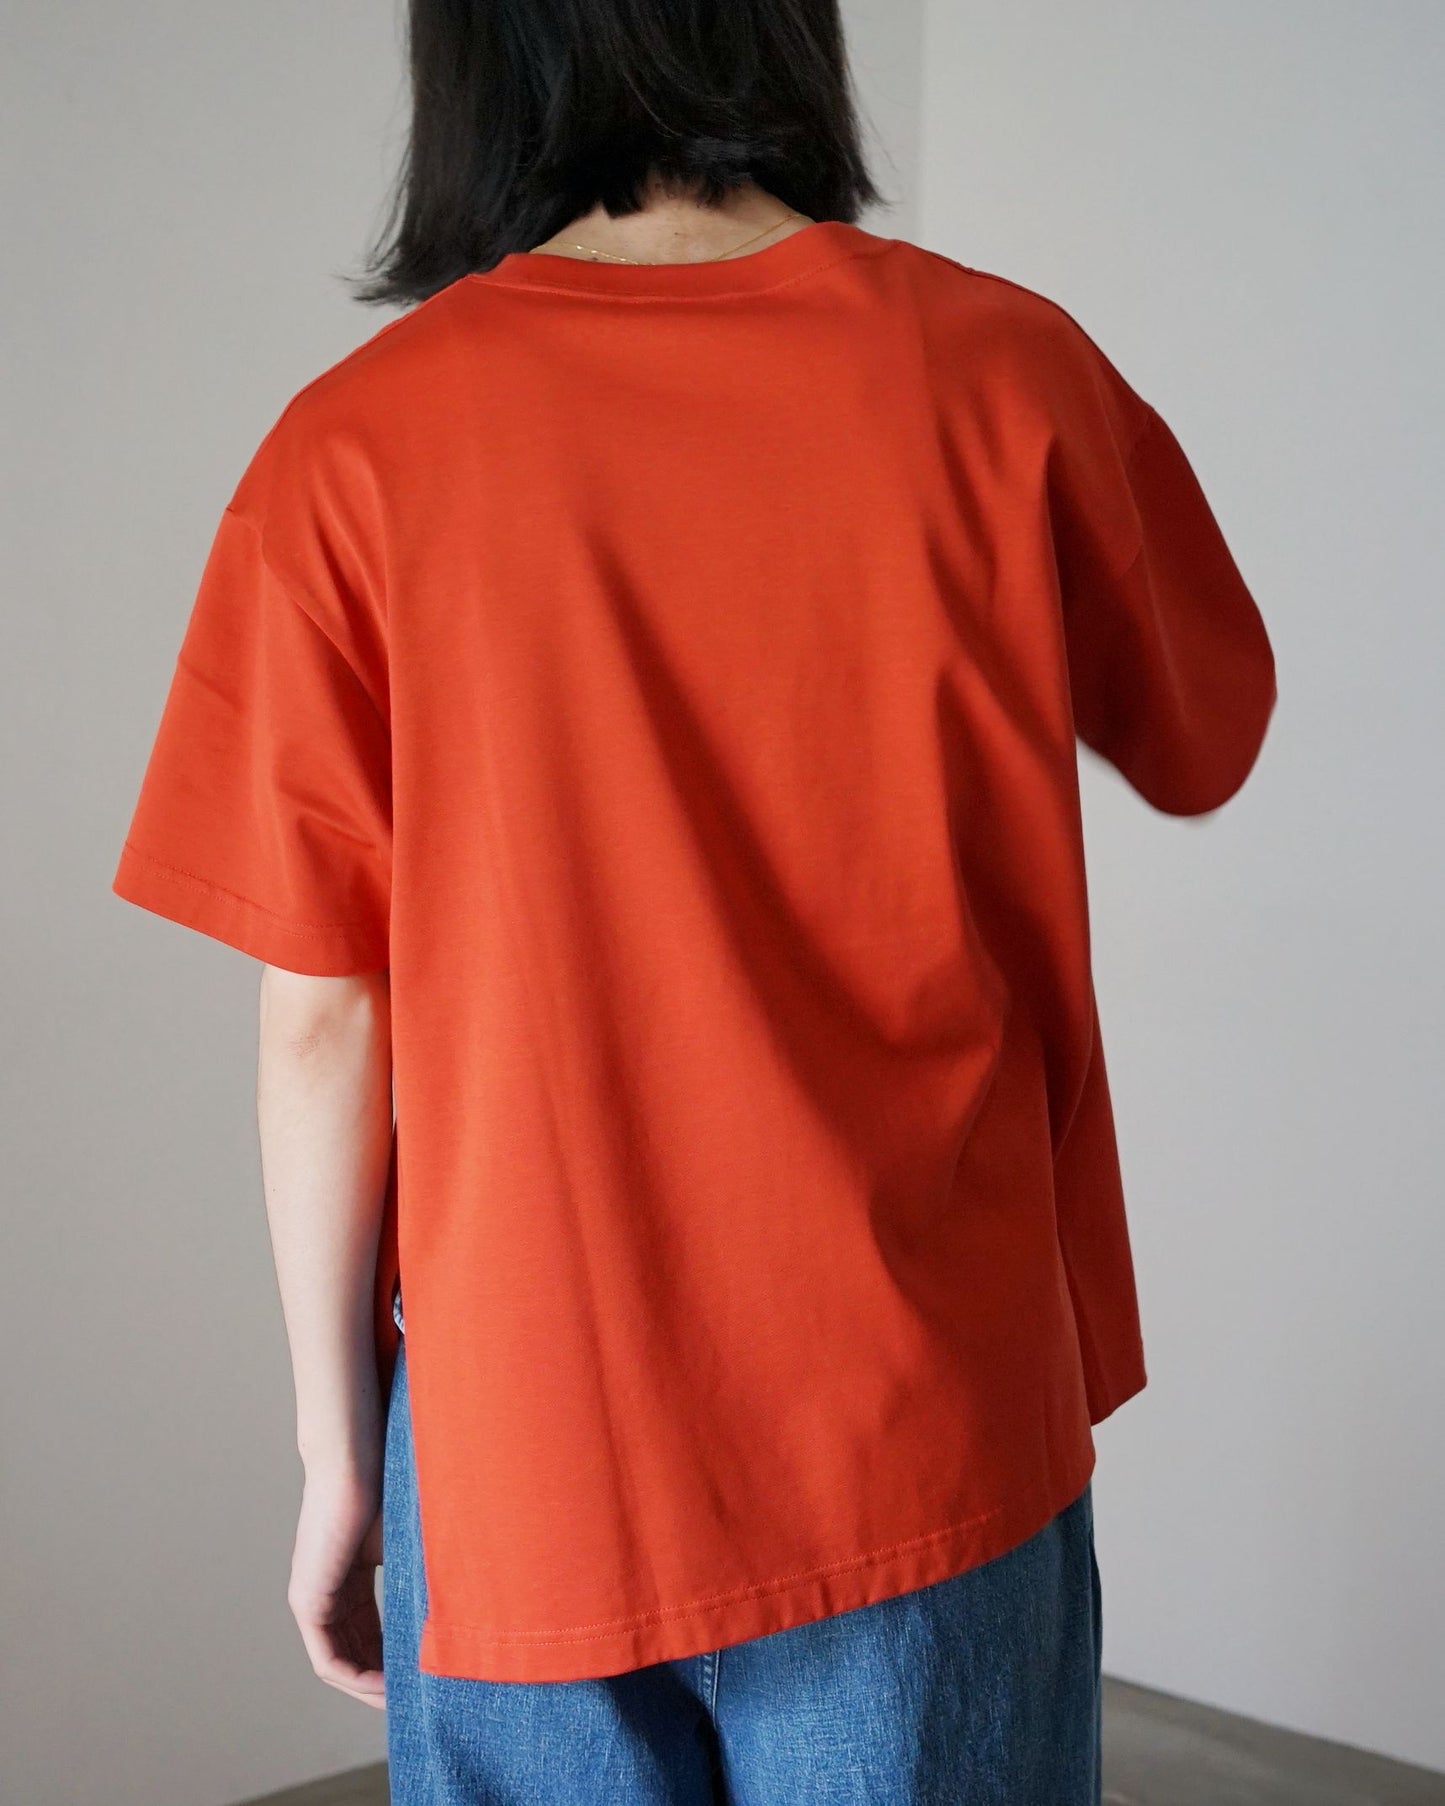 roundabout / slit Tshirts "RED"